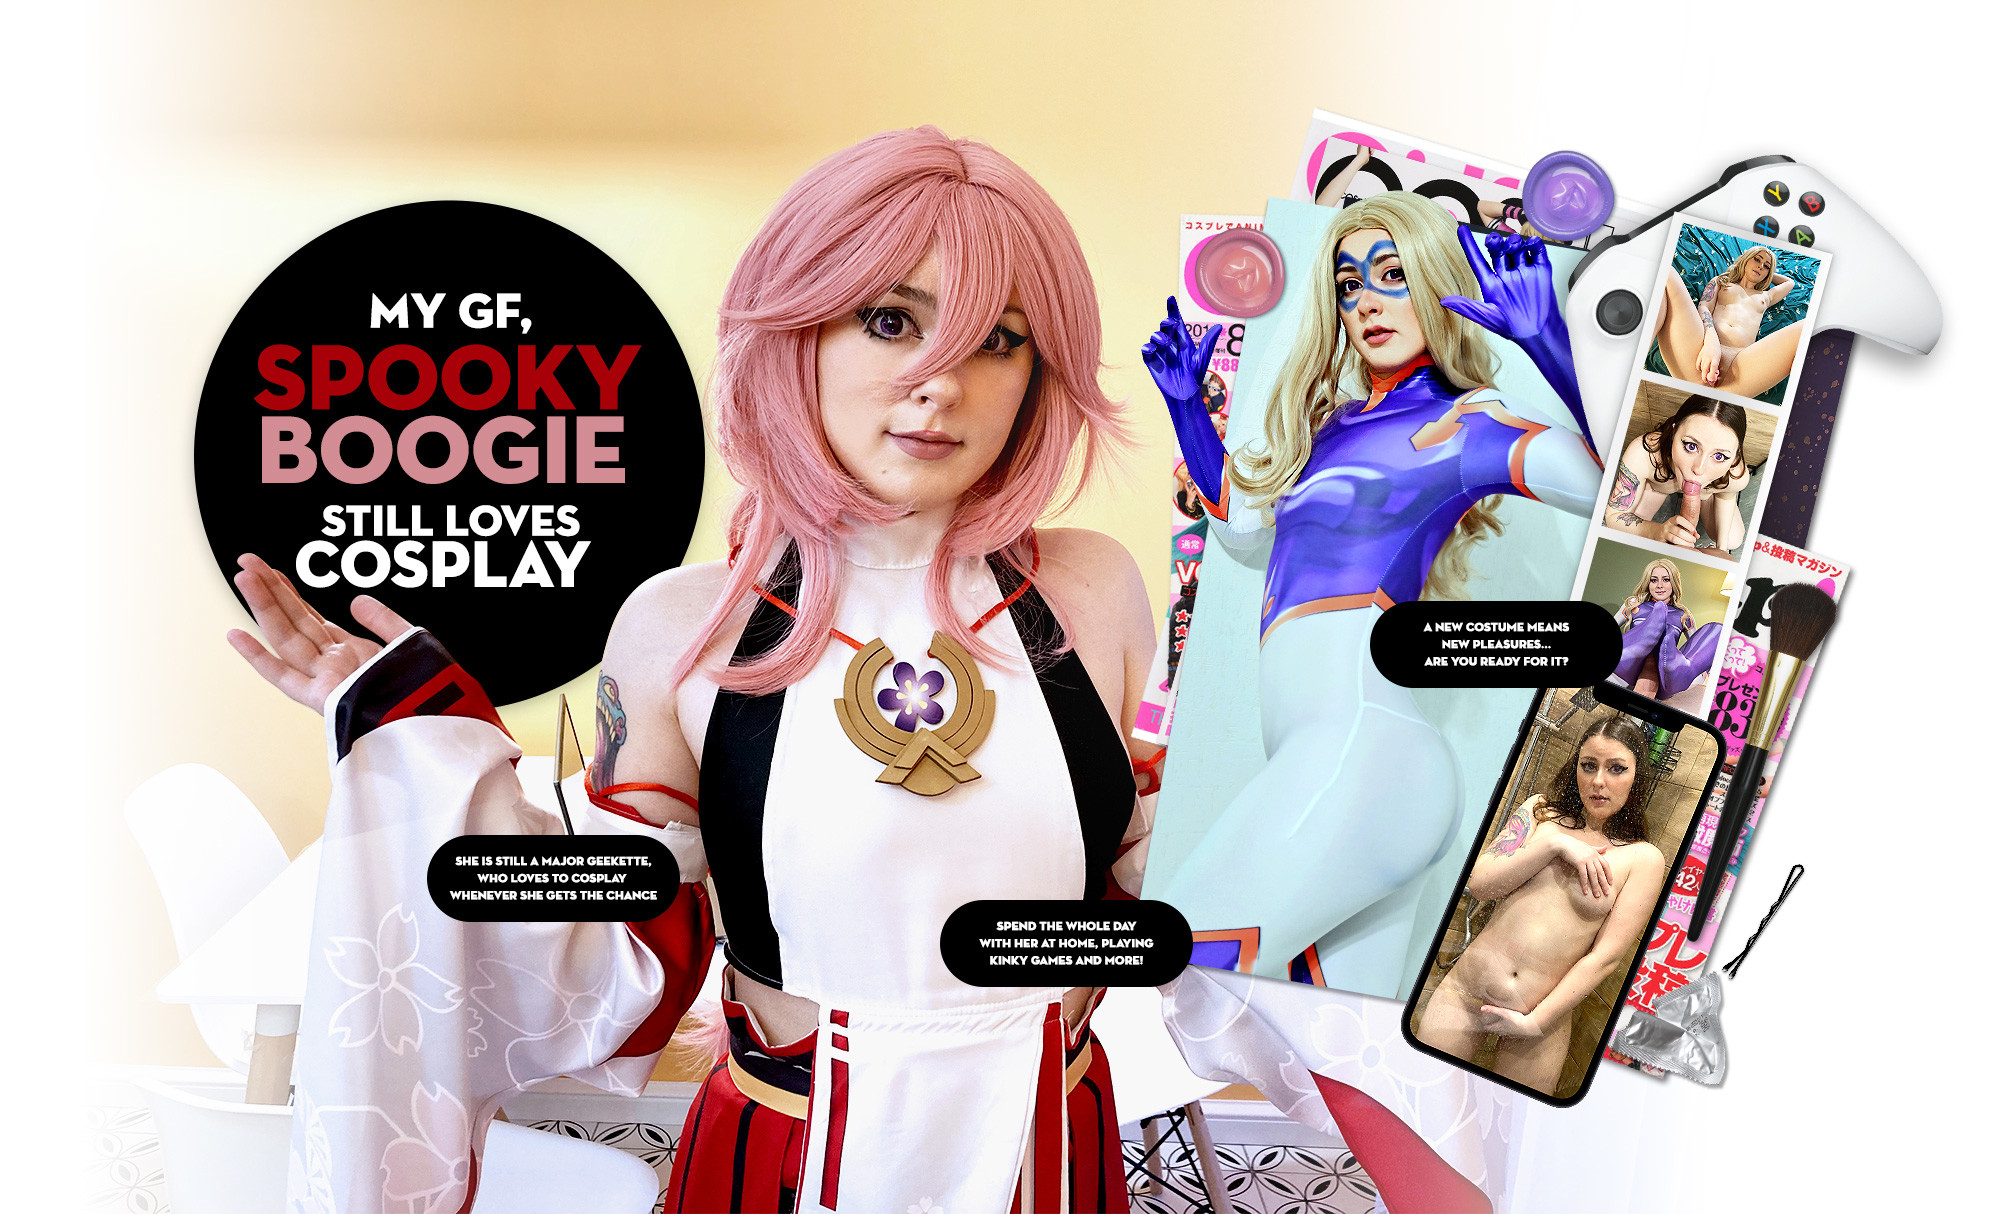 Download: My GF, Spooky Boogie Still Loves Cosplay by LifeSelector.